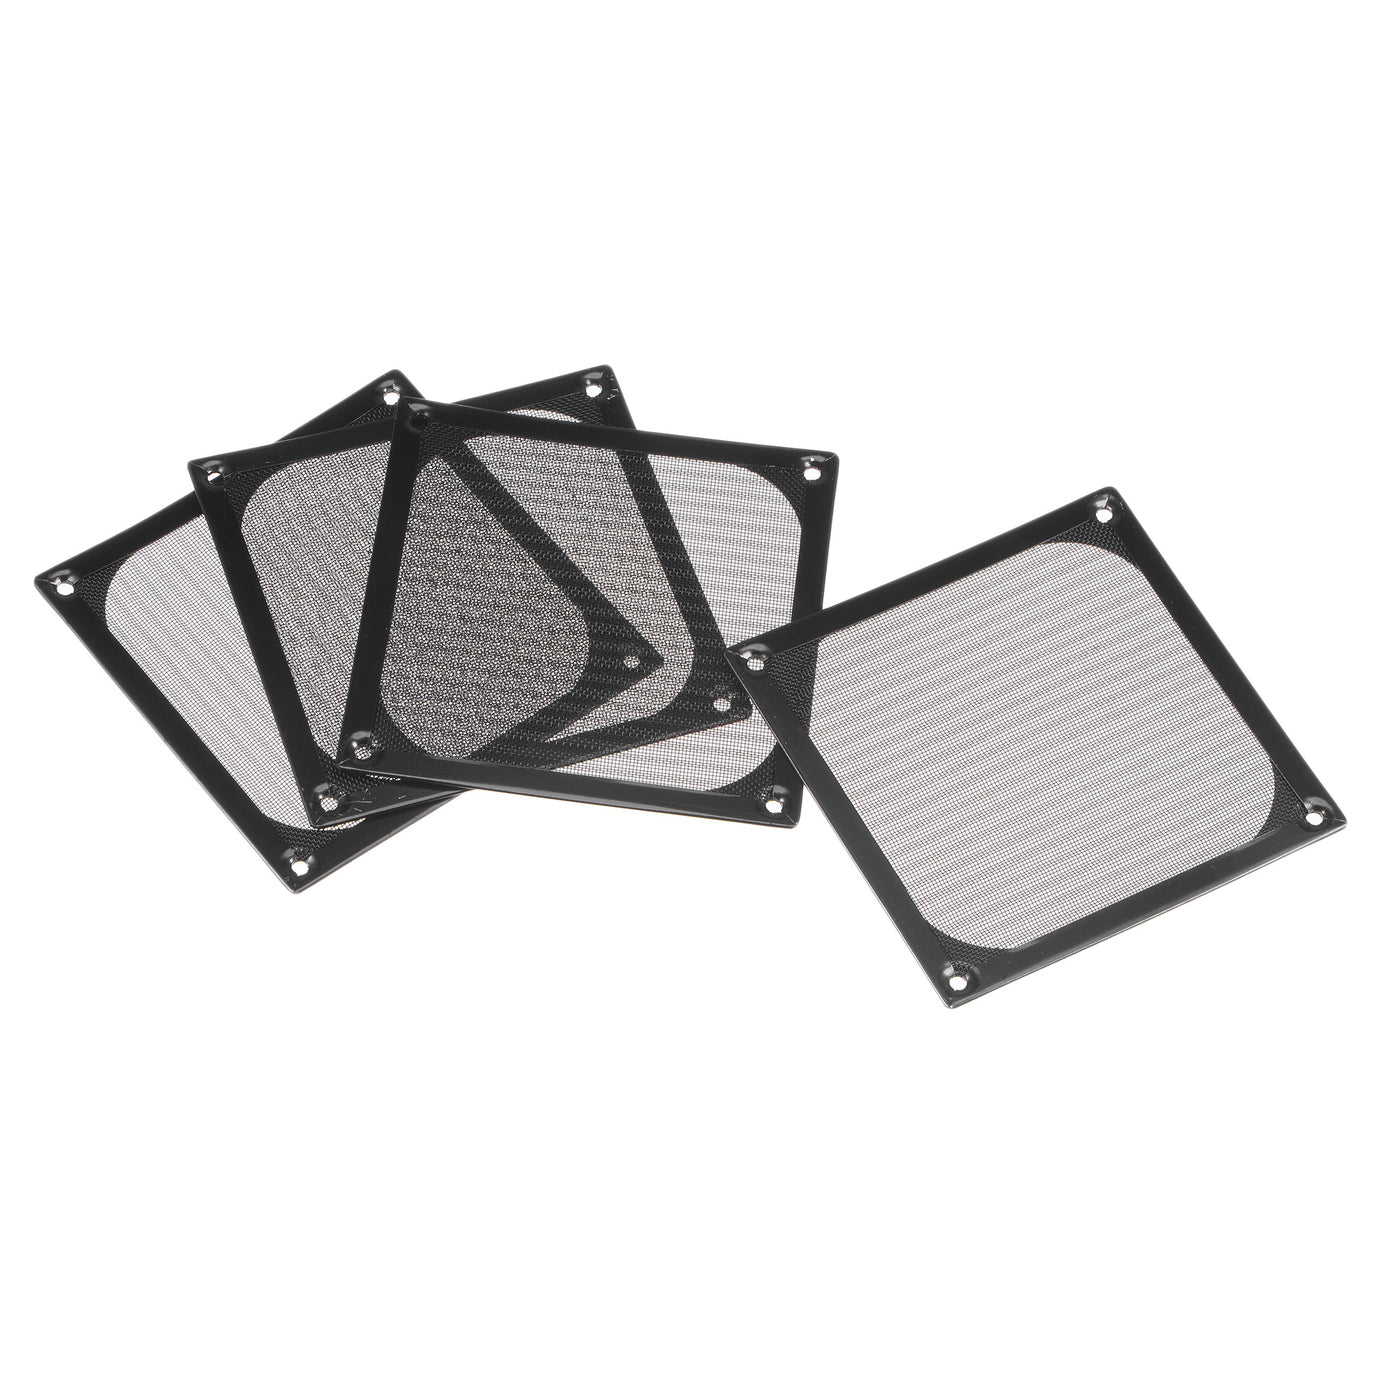 uxcell Uxcell PC Dust Fan Screen Aluminum Mesh for Cooling Case Cover Black 120mm 4pcs